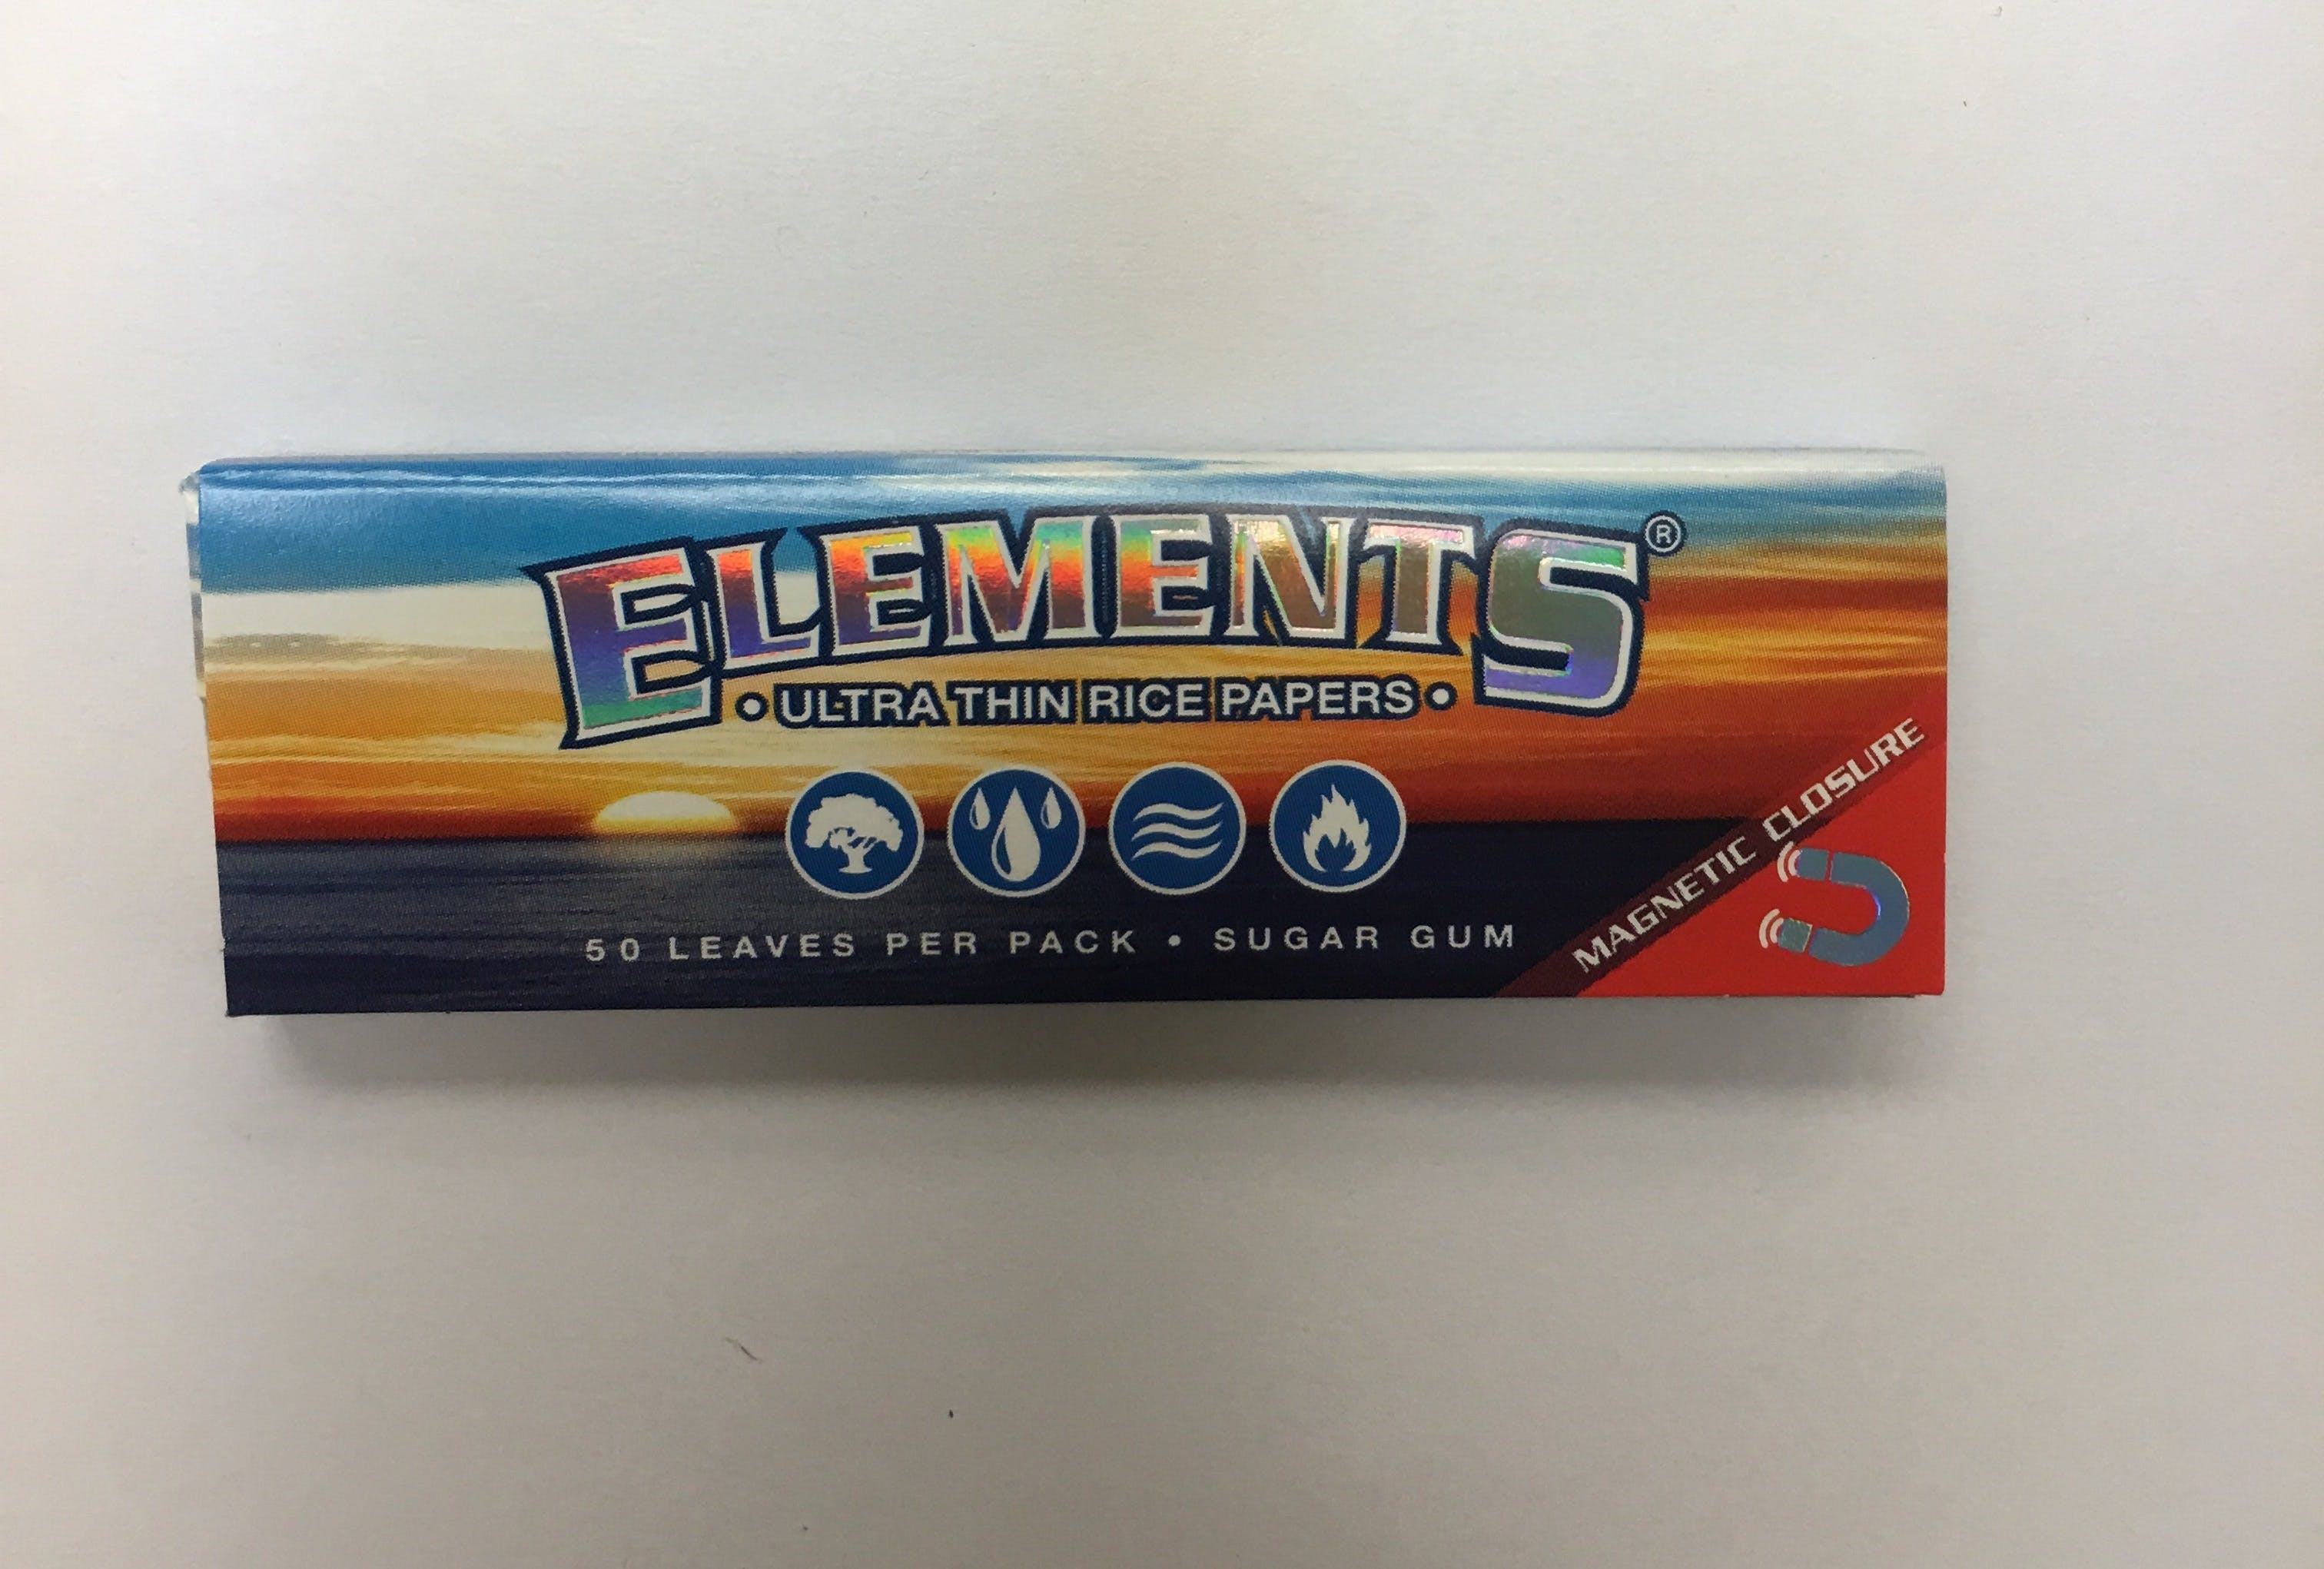 gear-elements-rice-papers-1-14